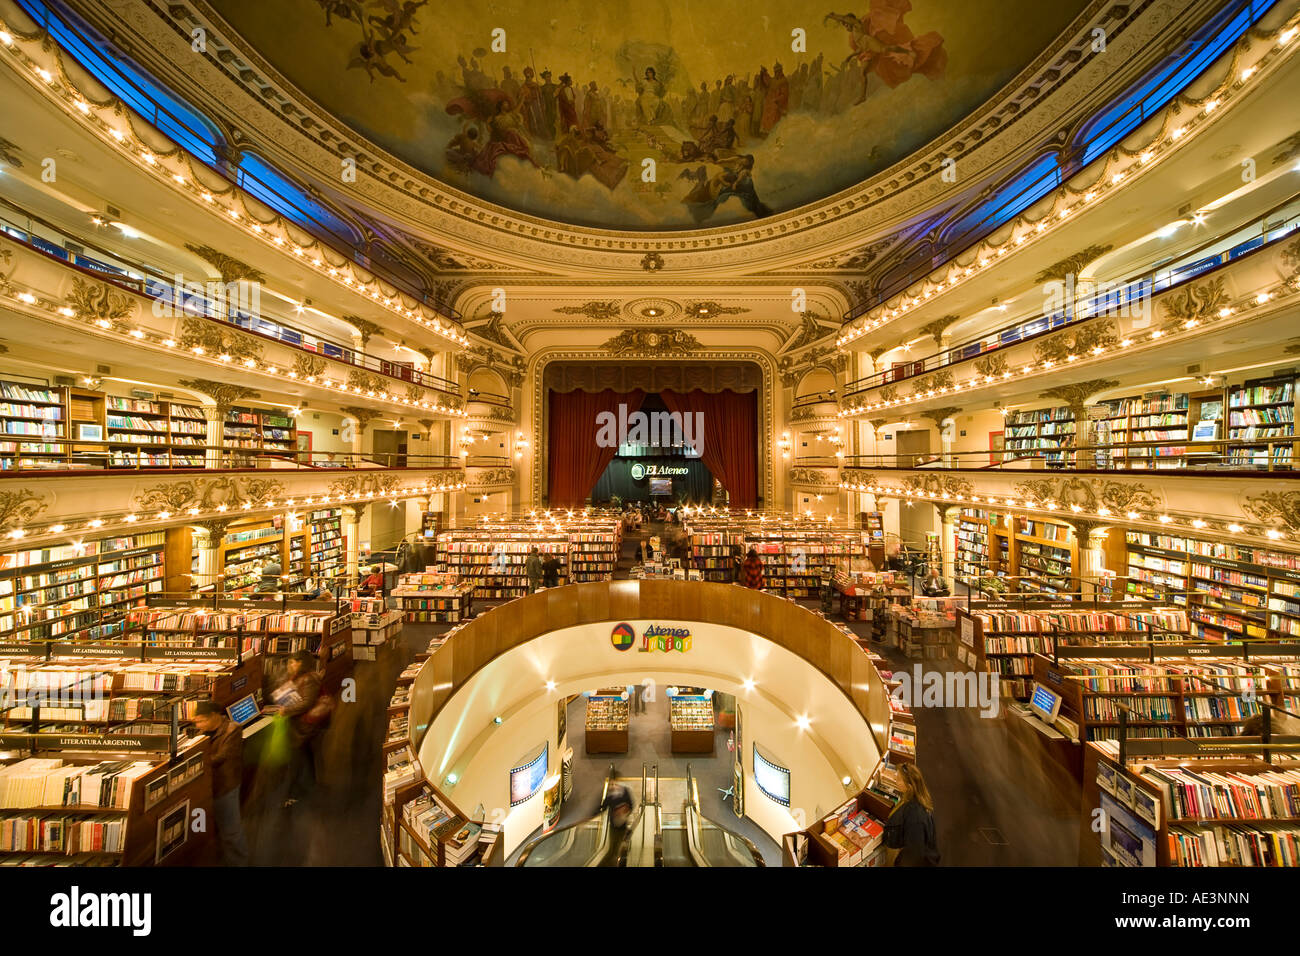 Buenos Aires. Mega bookstore El Ateneo. Converted Theater Grand Splendid, now the largest bookstore of Latin America. Stock Photo